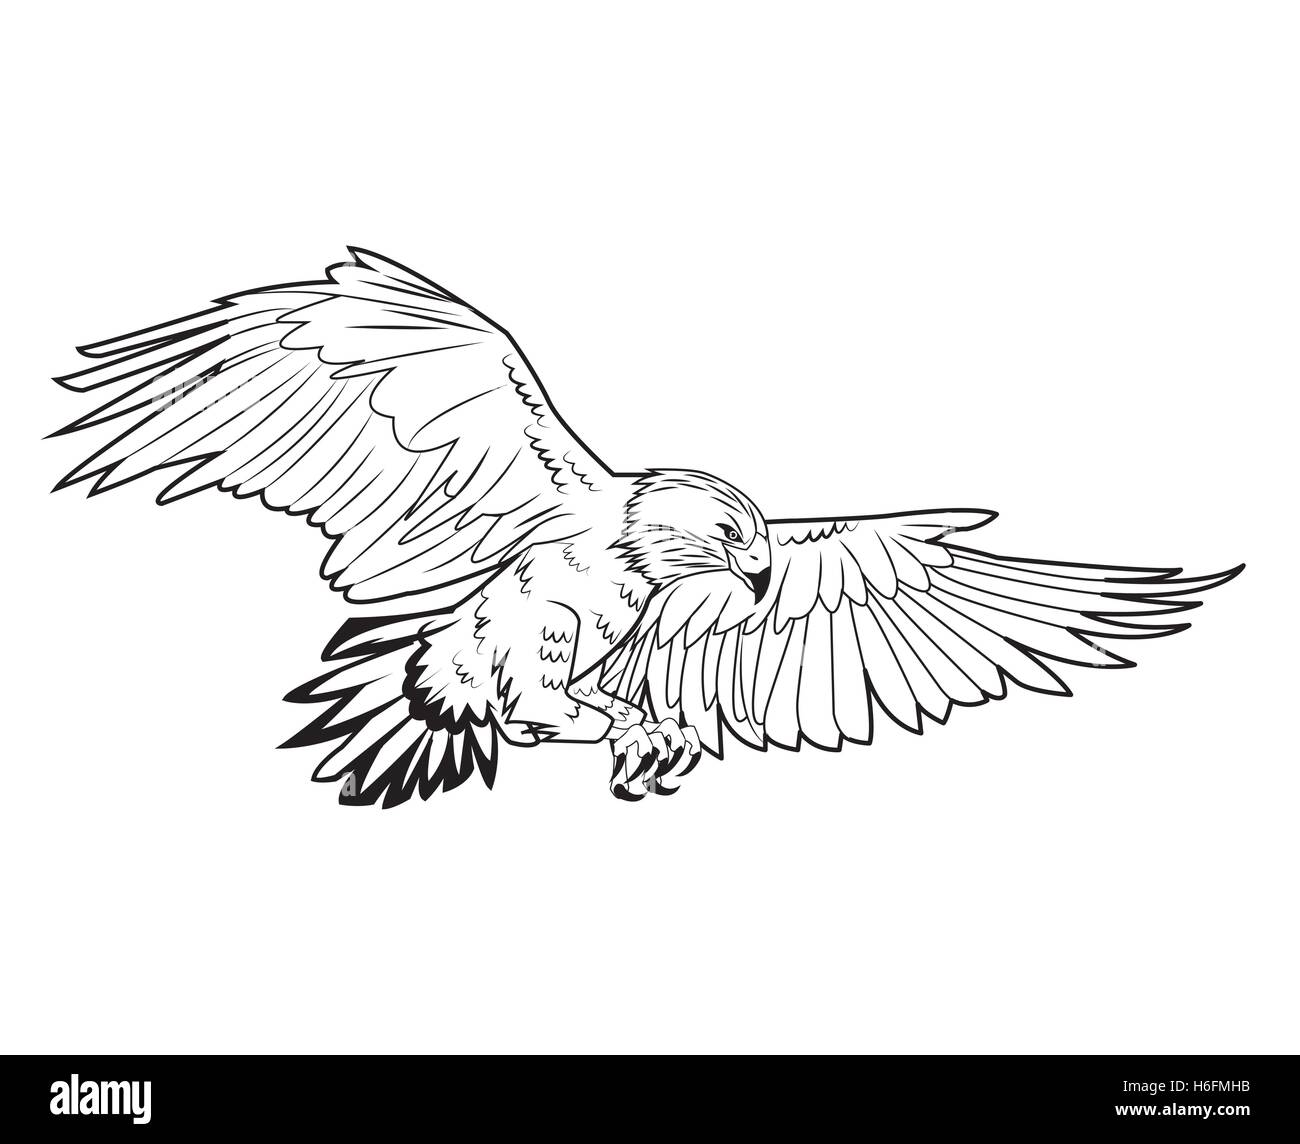 Tattoo Art Hand Drawing Eagle Black and White with Stock Vector   Illustration of eagle prey 141579901